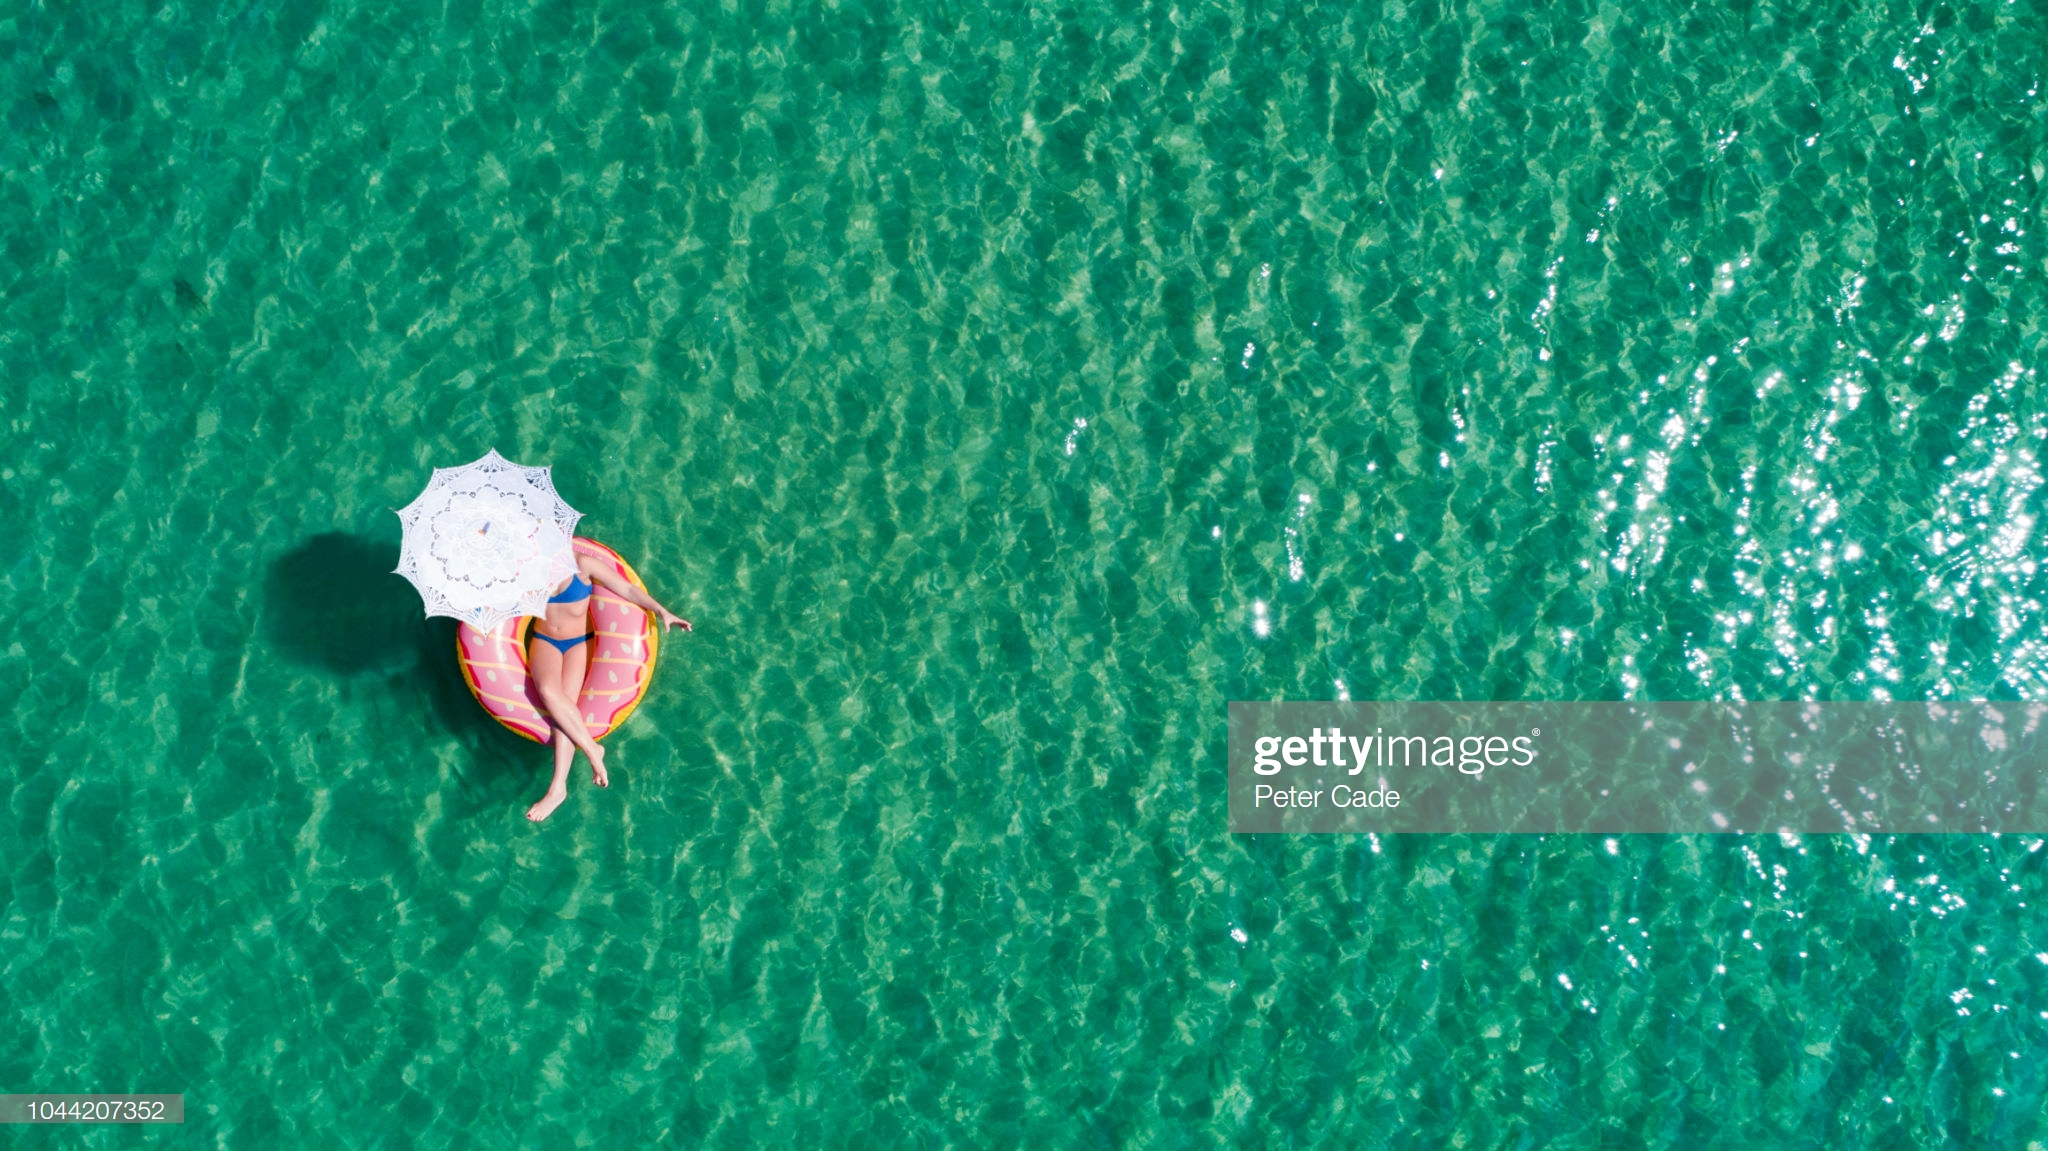 gettyimages-1044207352-2048x2048